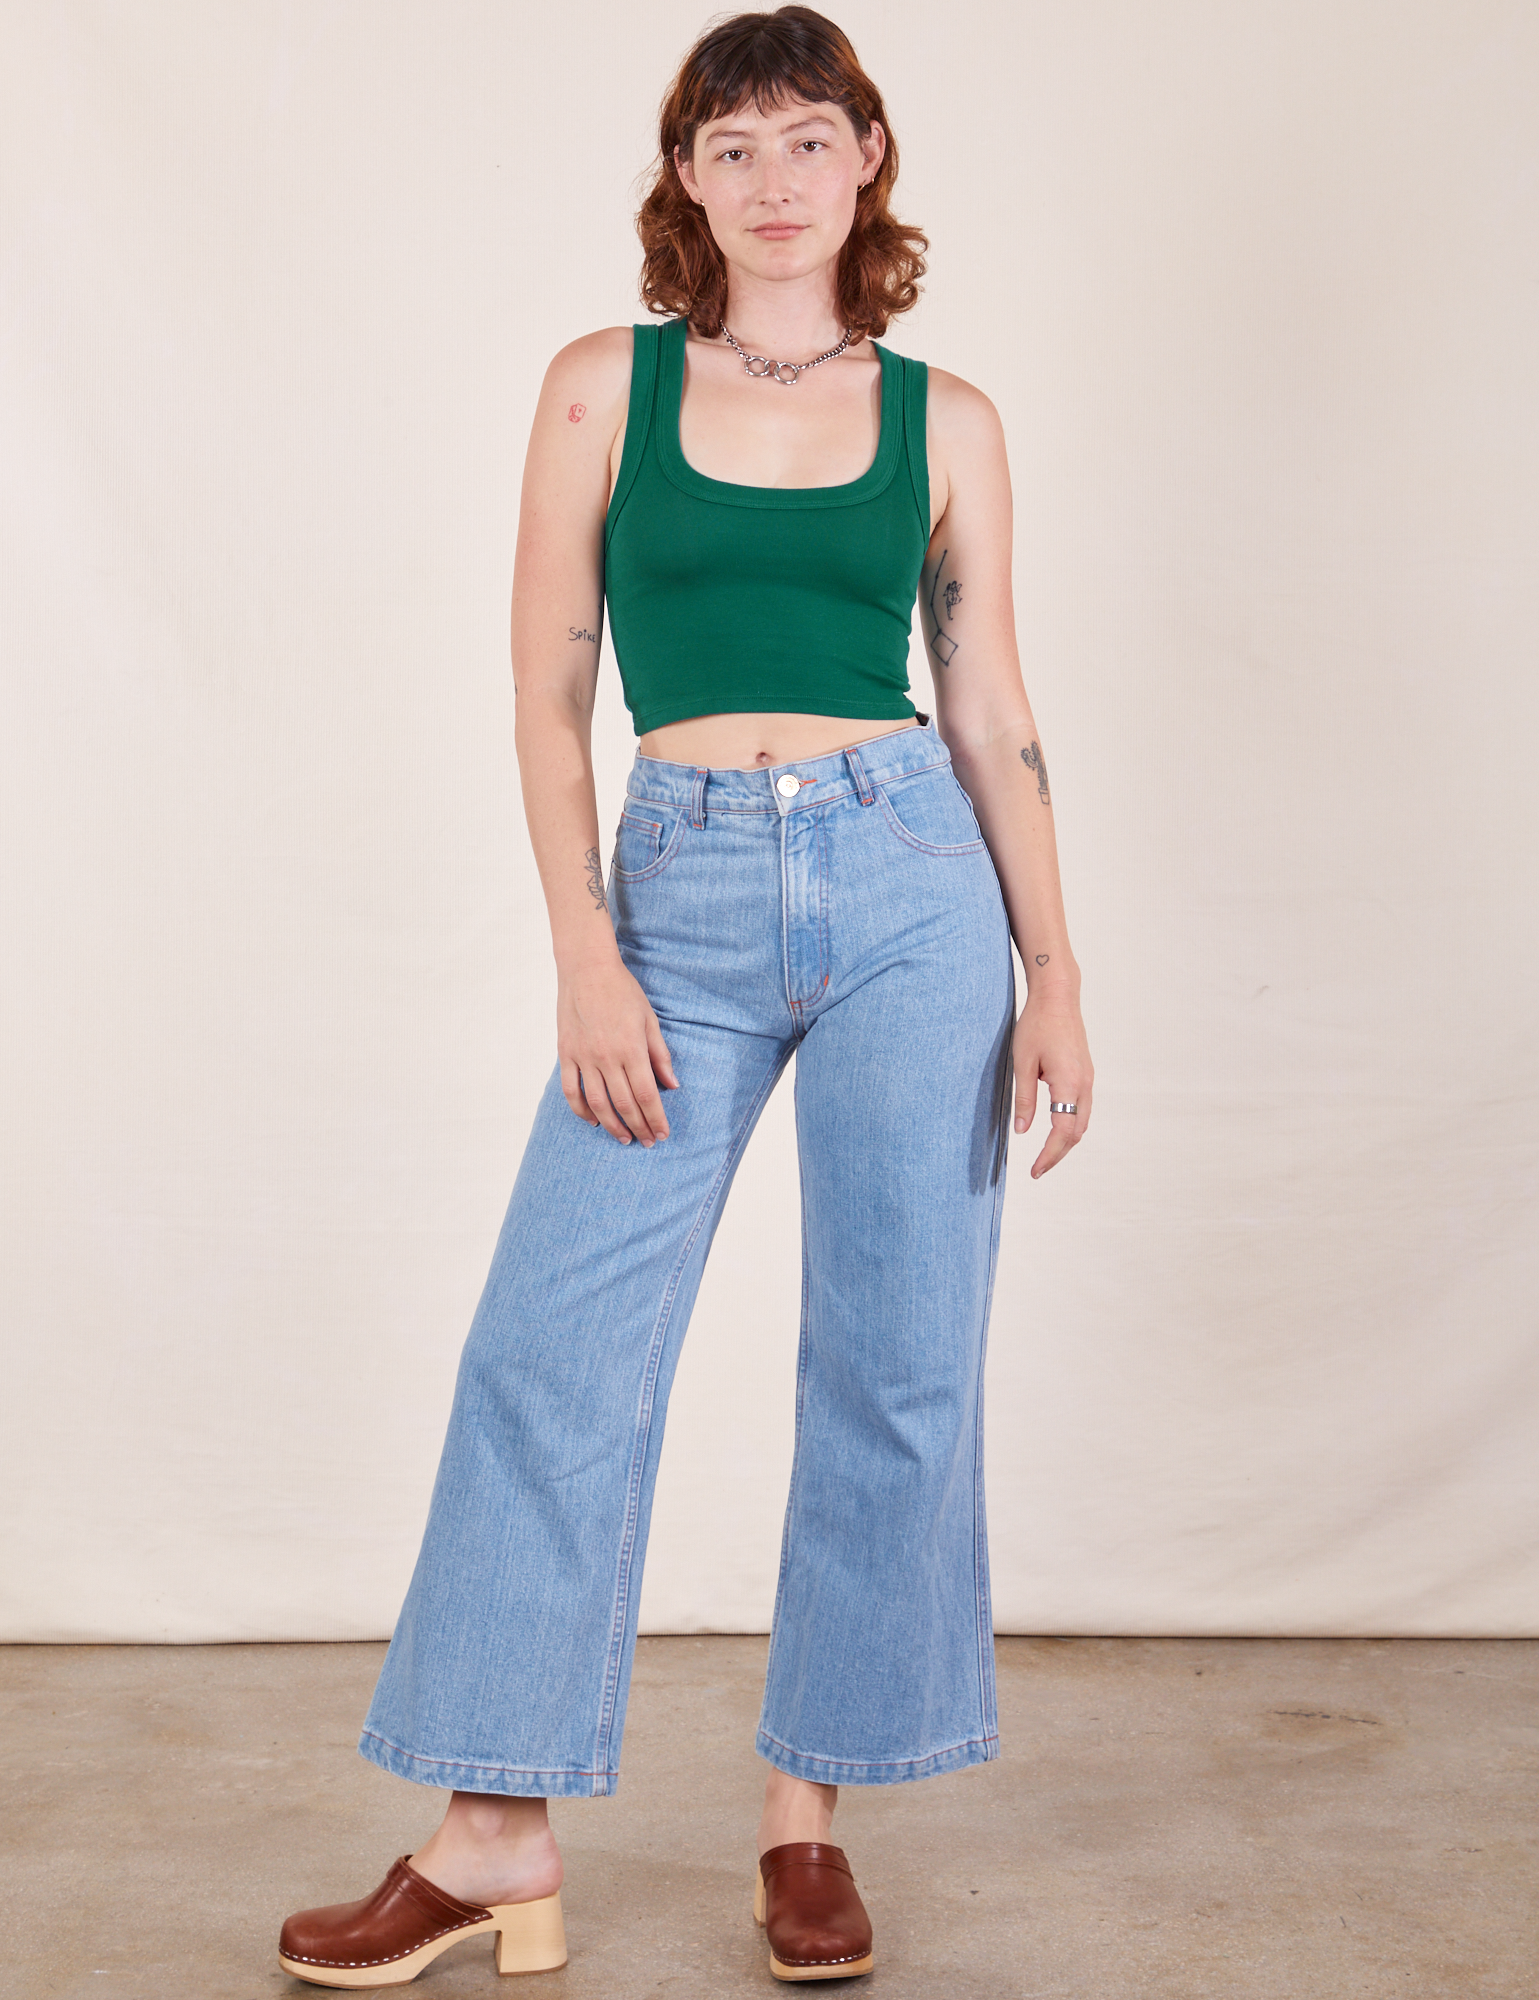 Alex is wearing Cropped Tank Top in Hunter Green and light wash Sailor Jeans